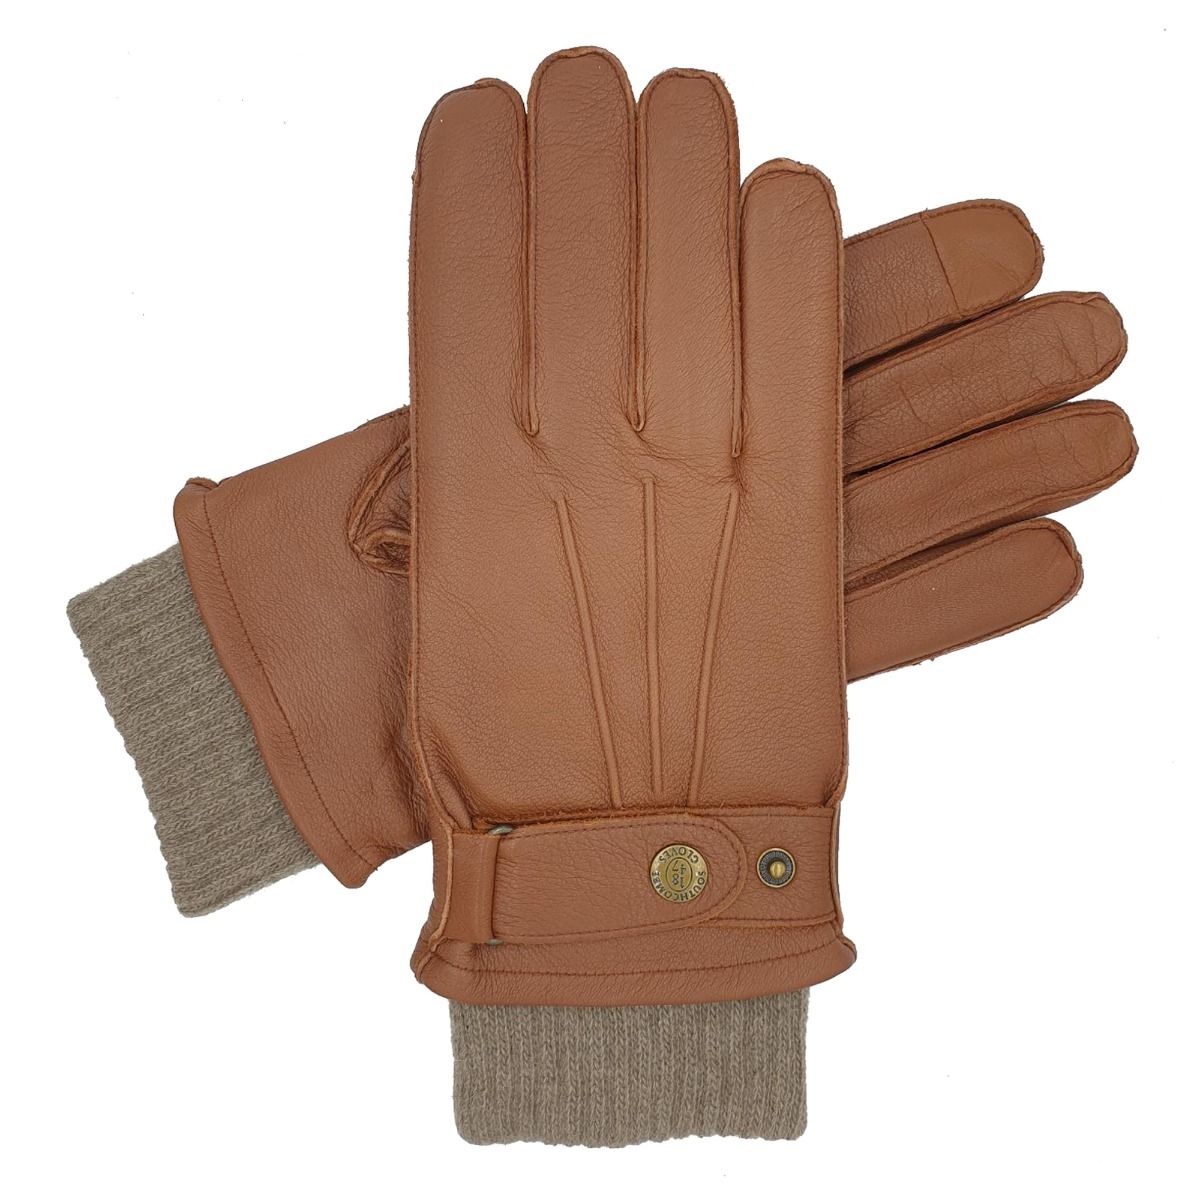 Southcombe Reeves - Cashmere Lined Deerskin Gloves Tan